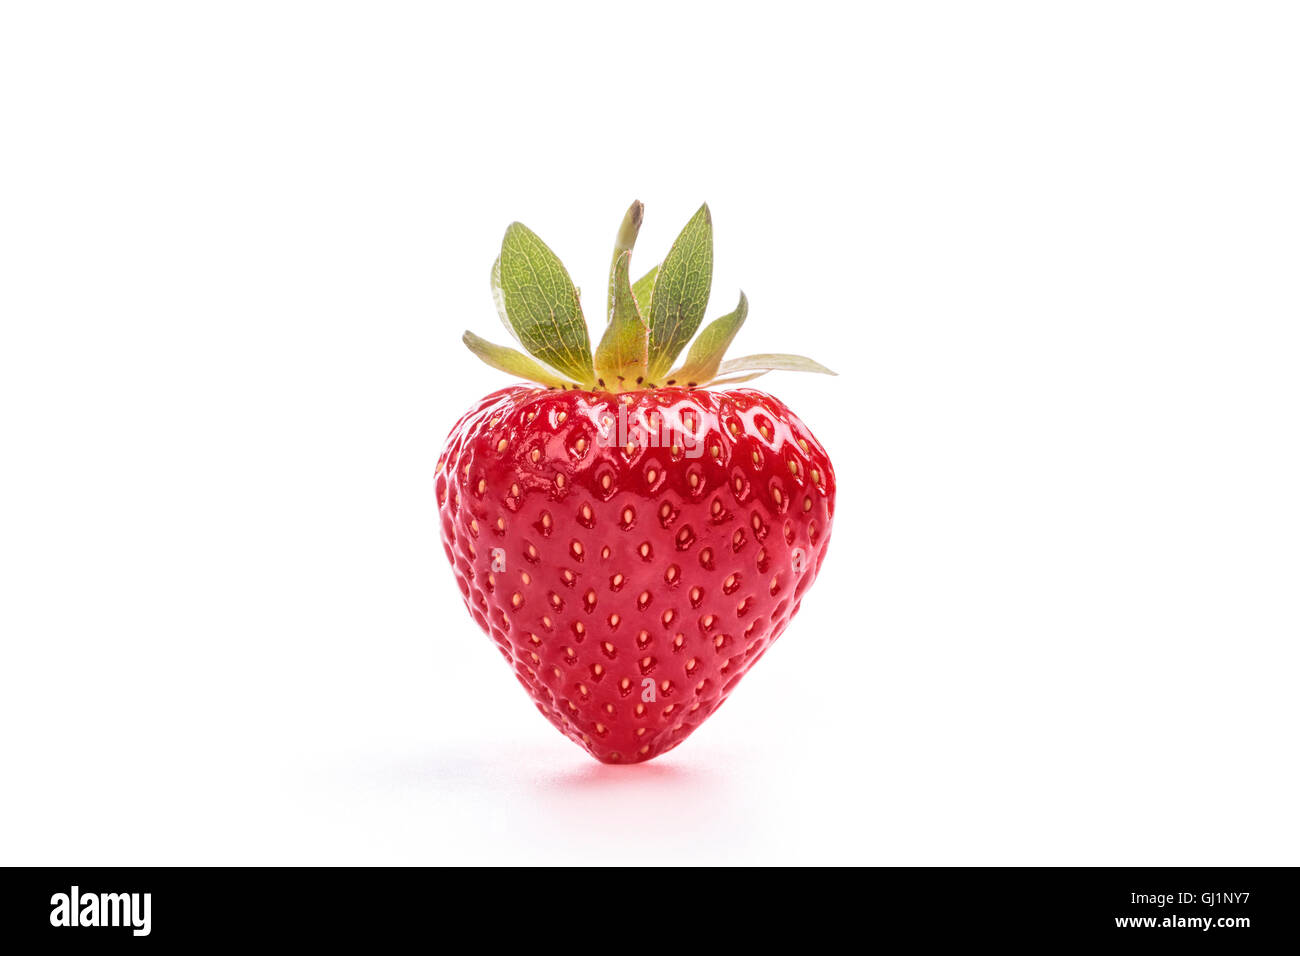 Red strawberry on a white background with clipping path. Stock Photo